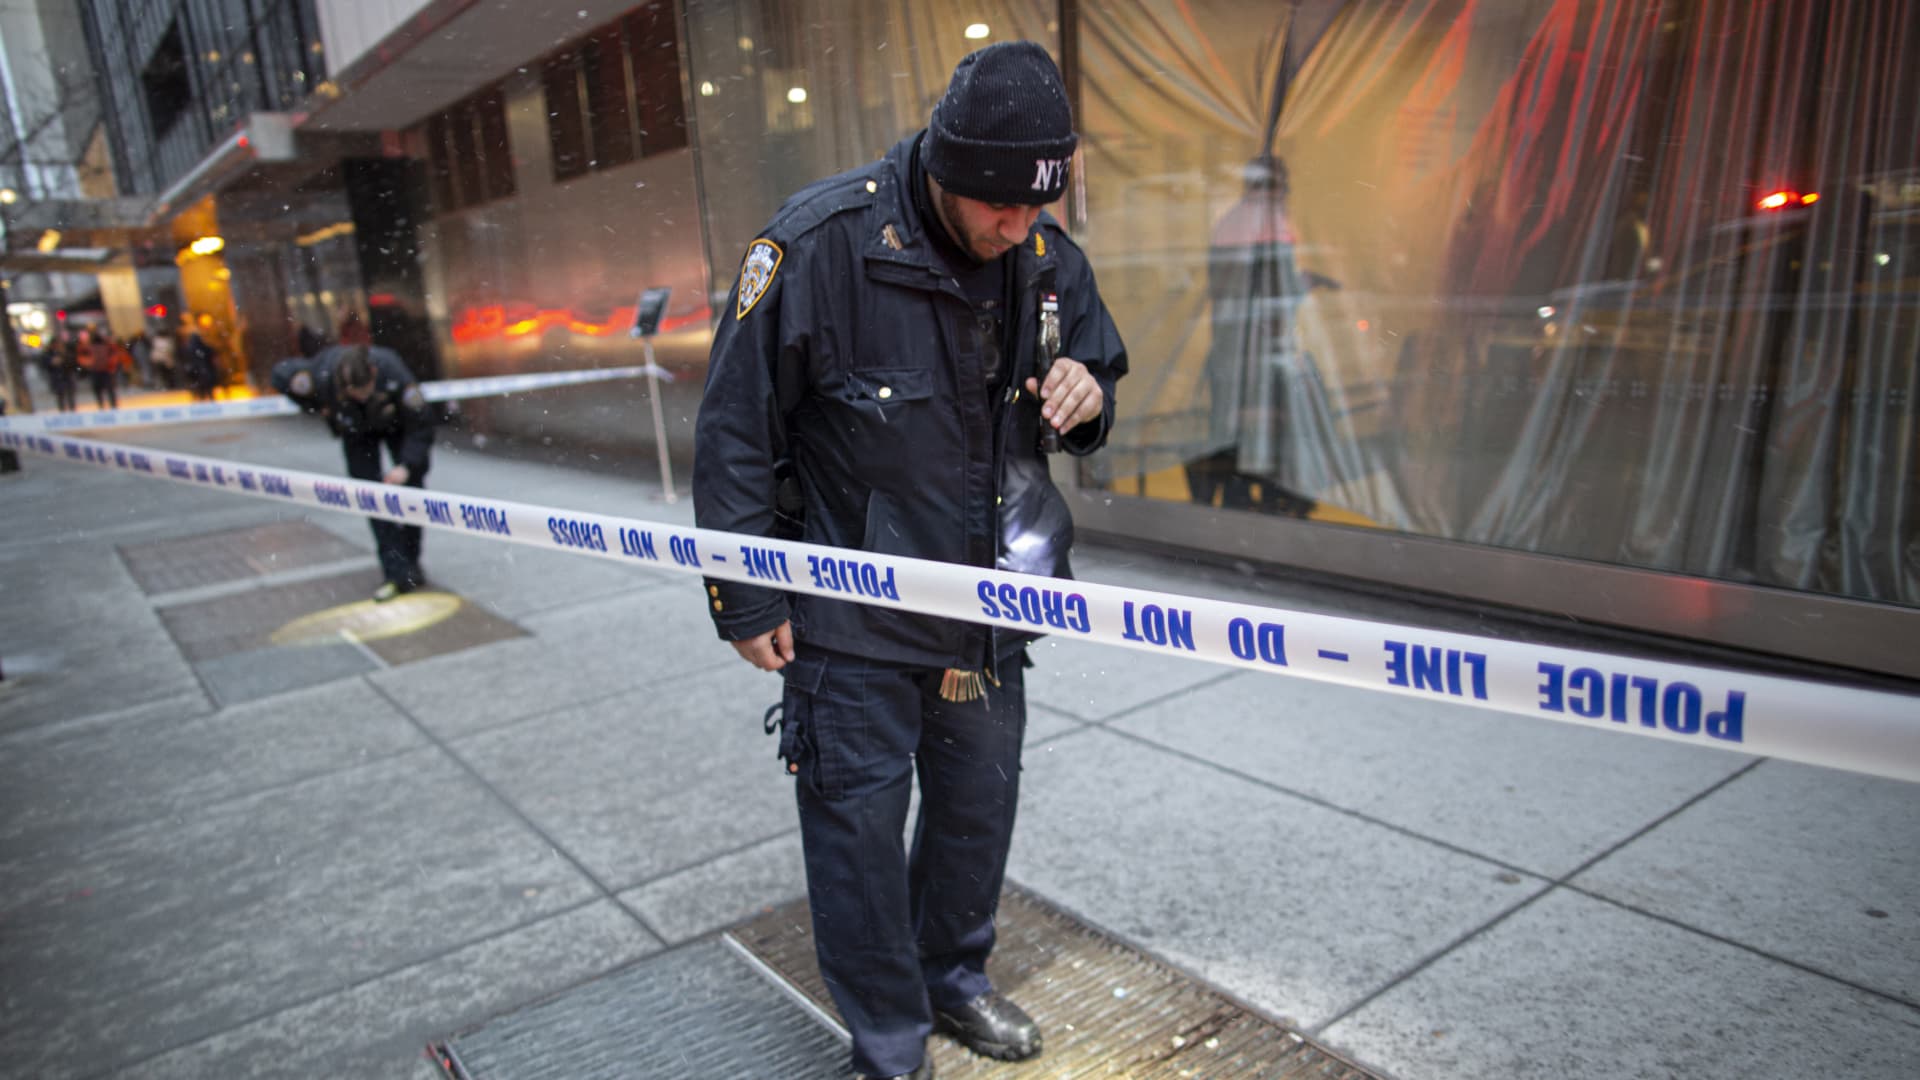 A New York City police officer looks on the ground next to the entrance of the Museum of Modern Art in New York City on March 12, 2022.